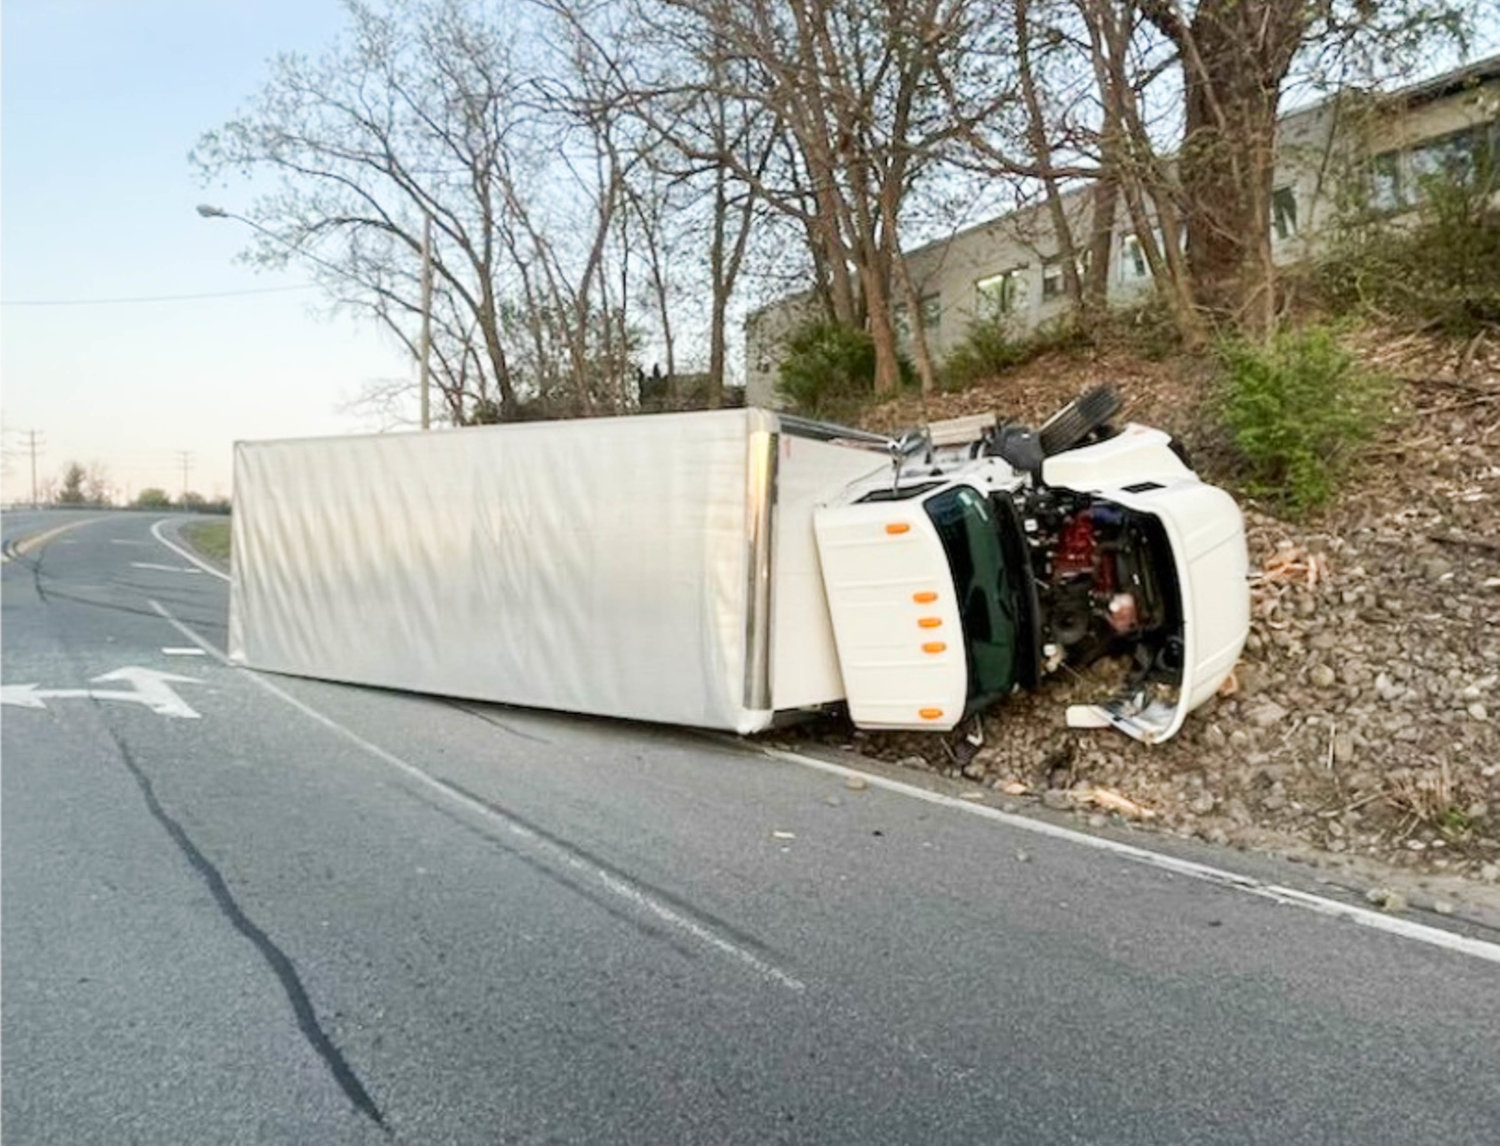 This box truck rolled onto its side, and its driver was hospitalized, after crashing into the side of a car on Route 5S in German Flatts in Herkimer County Tuesday evening, according to the New York State Police.